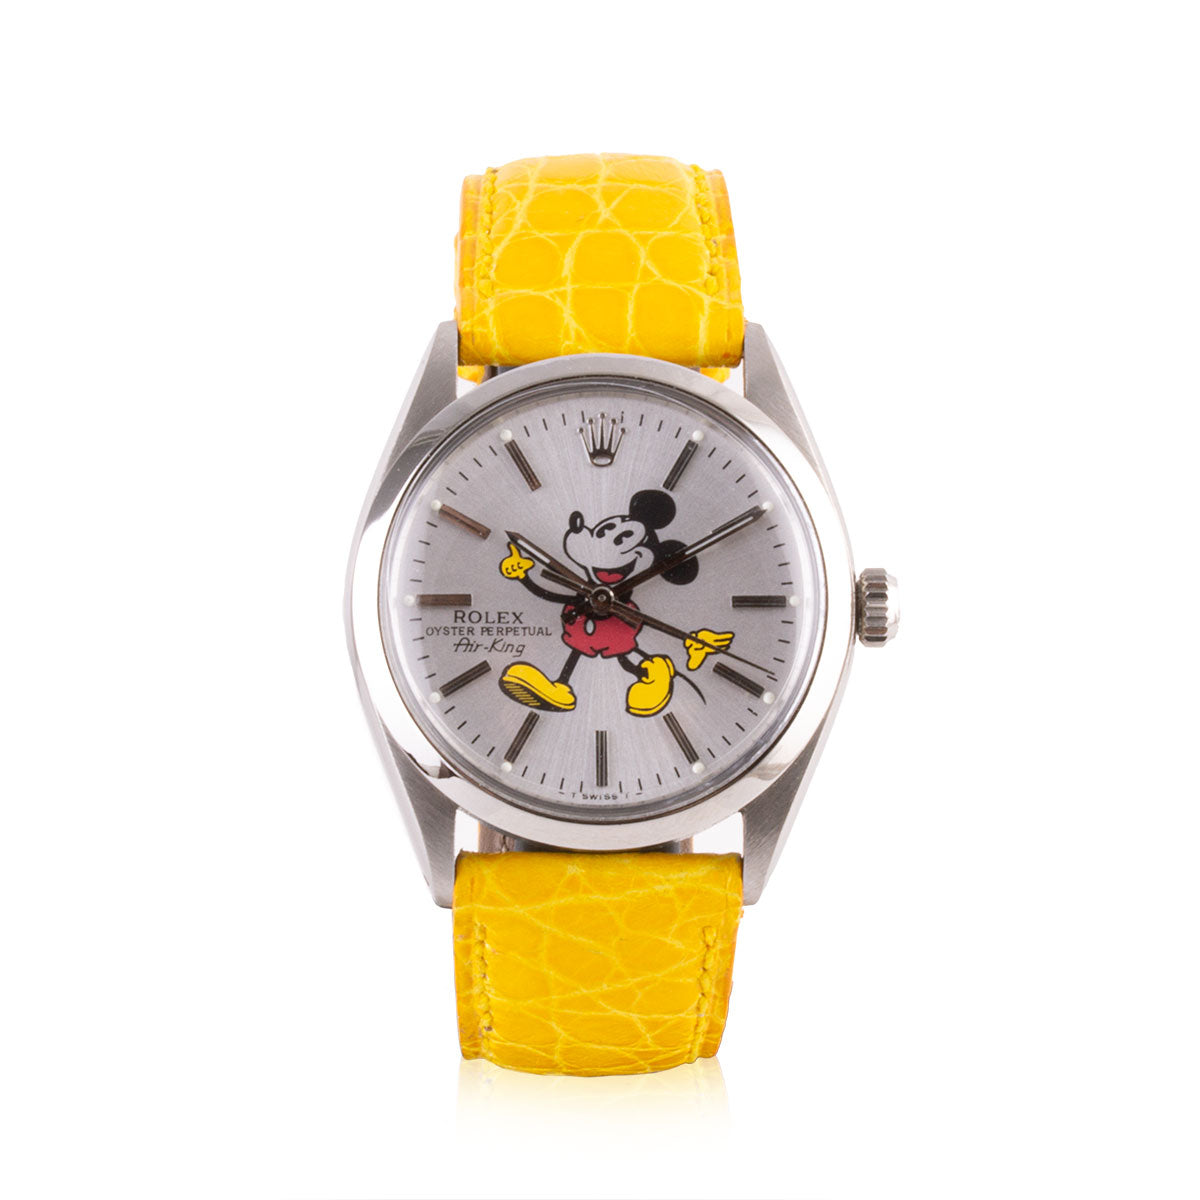 Second-hand watch - Rolex - Air-King "Mickey" - 4400€